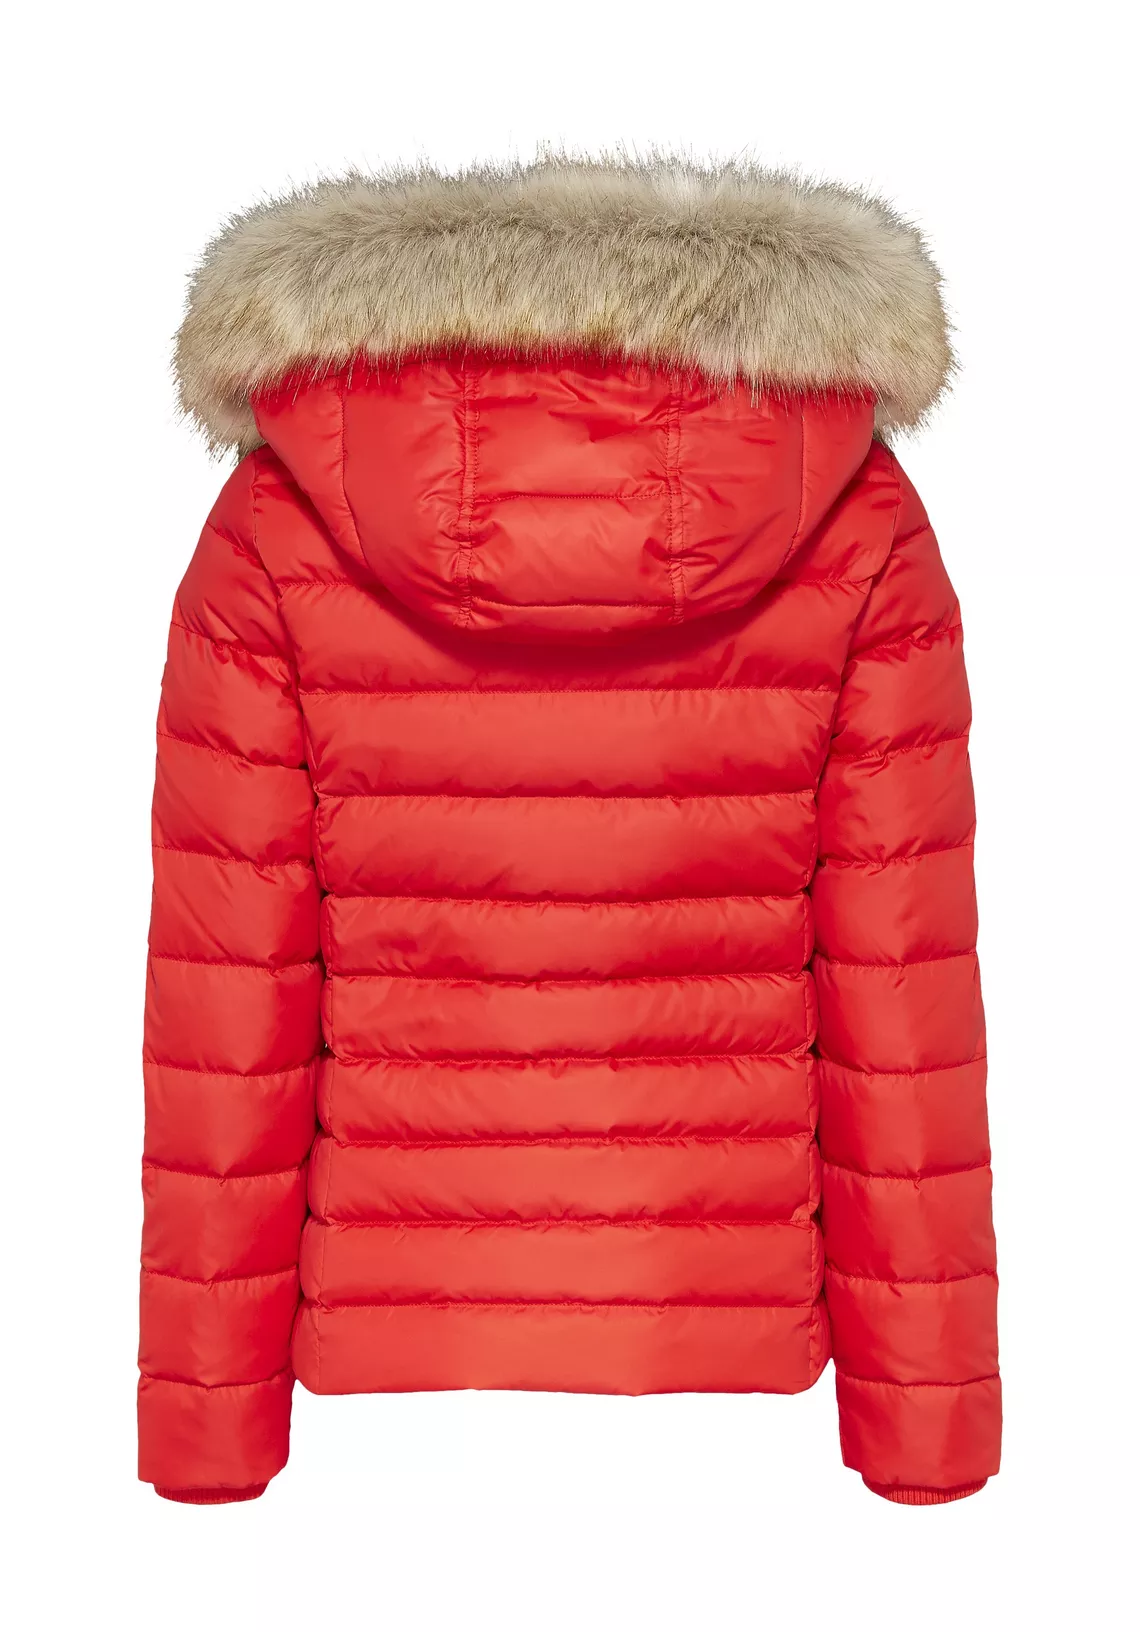 Tommy Hilfiger Basic Hooded Winterjas  Vrouwen, rood